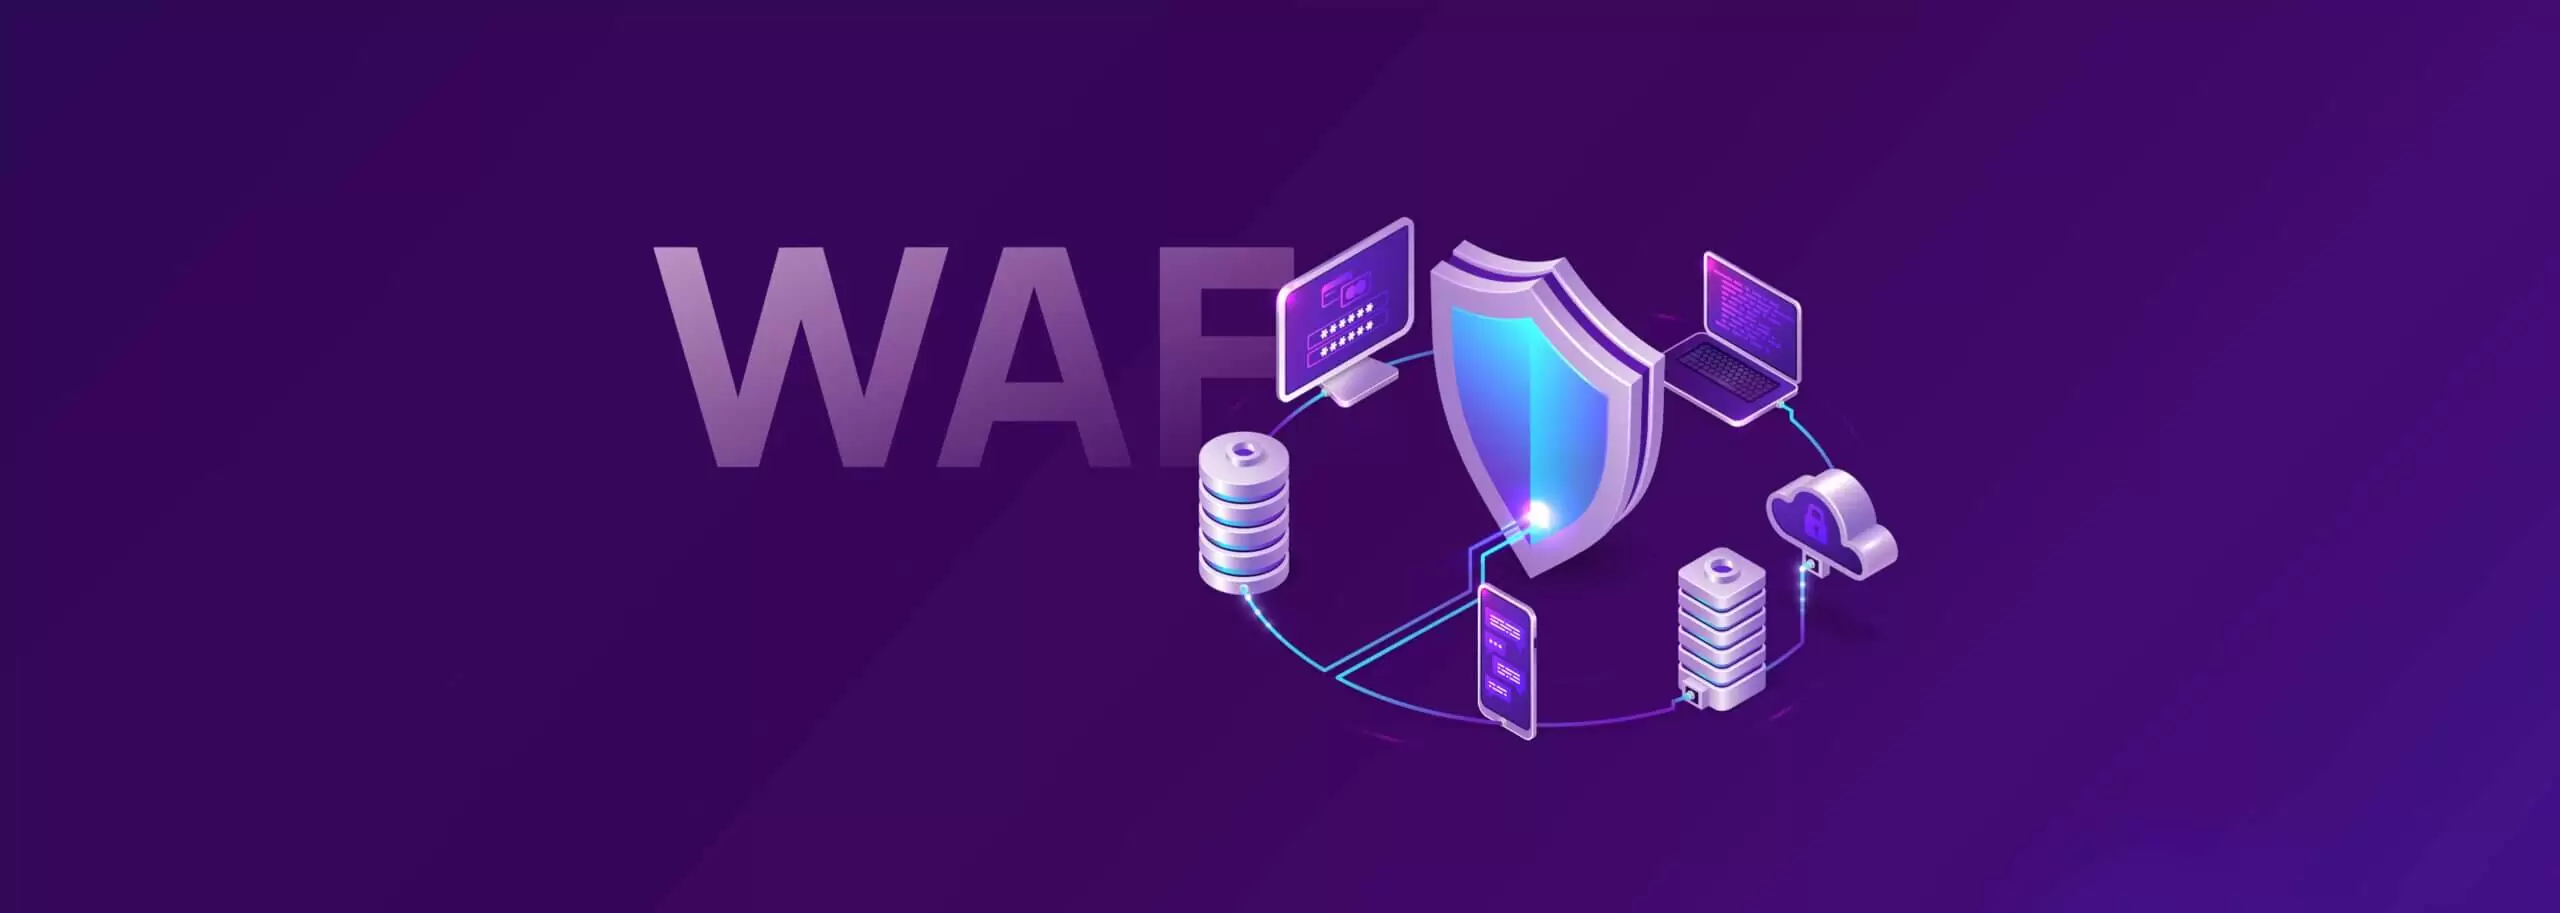 Illustration depicting WAF as part of cybersecurity